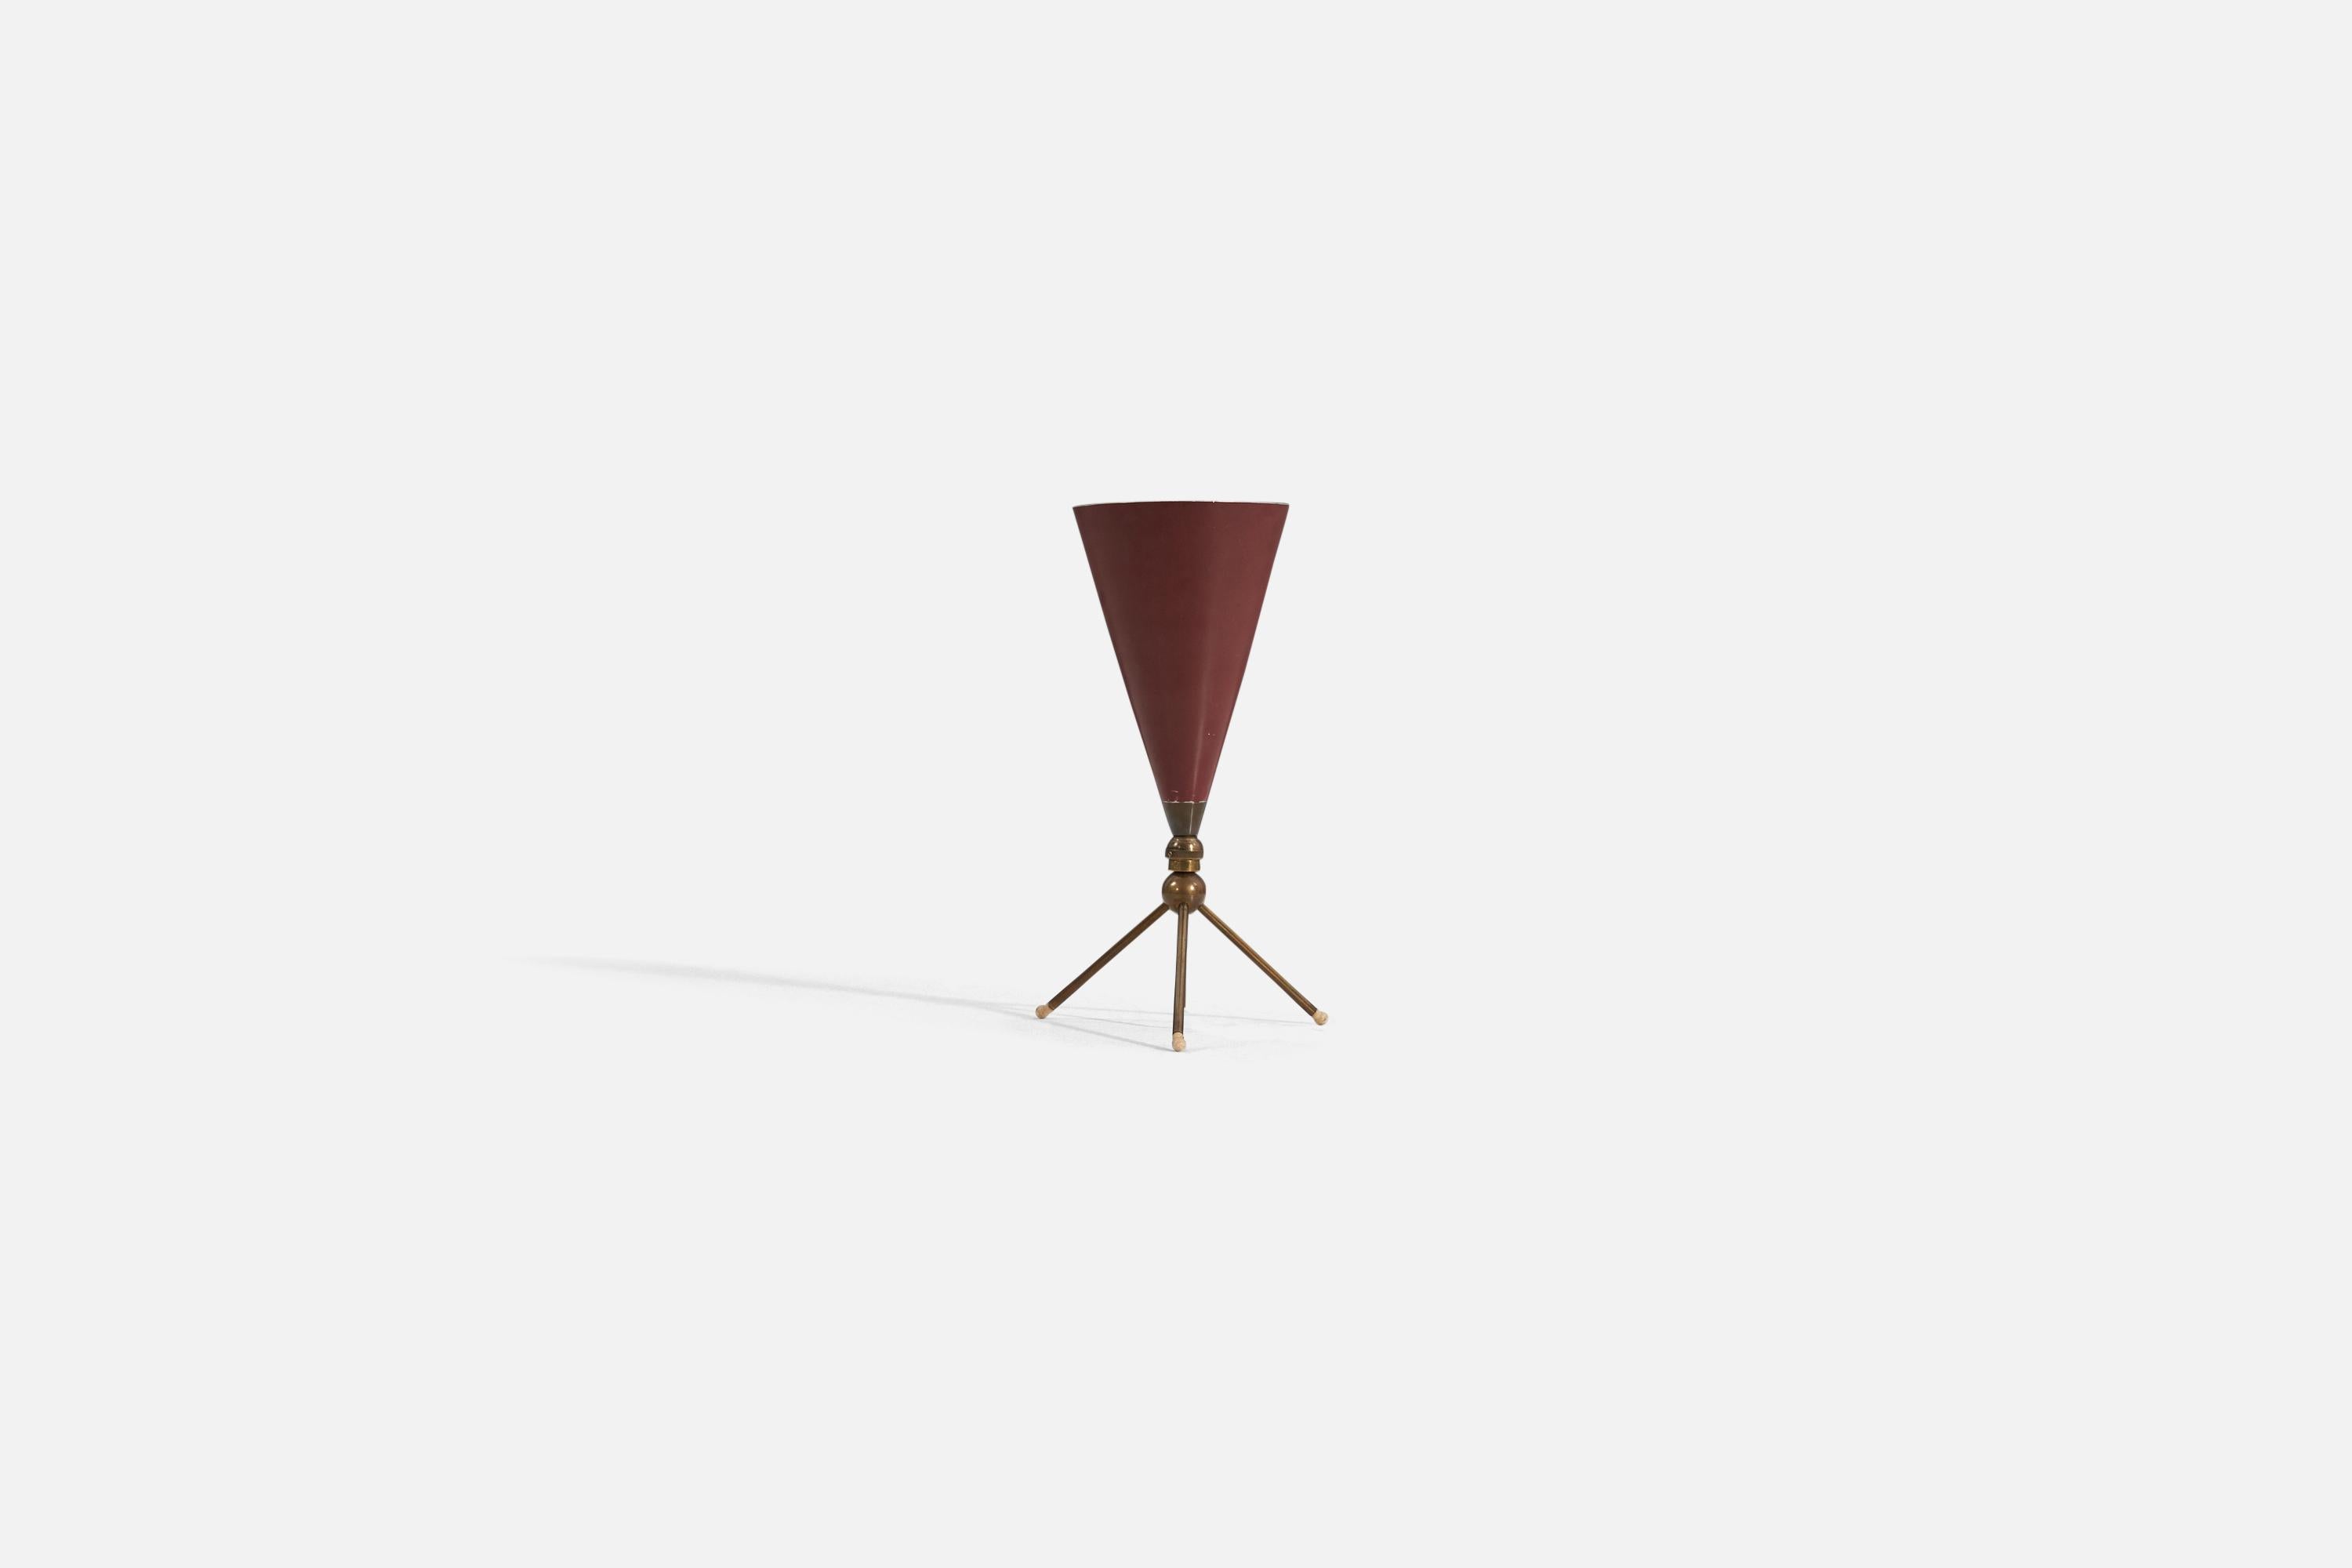 An adjustable table lamp designed and produced in Italy, 1950s. The lamp features a brass base with a red-lacquered metal shade.